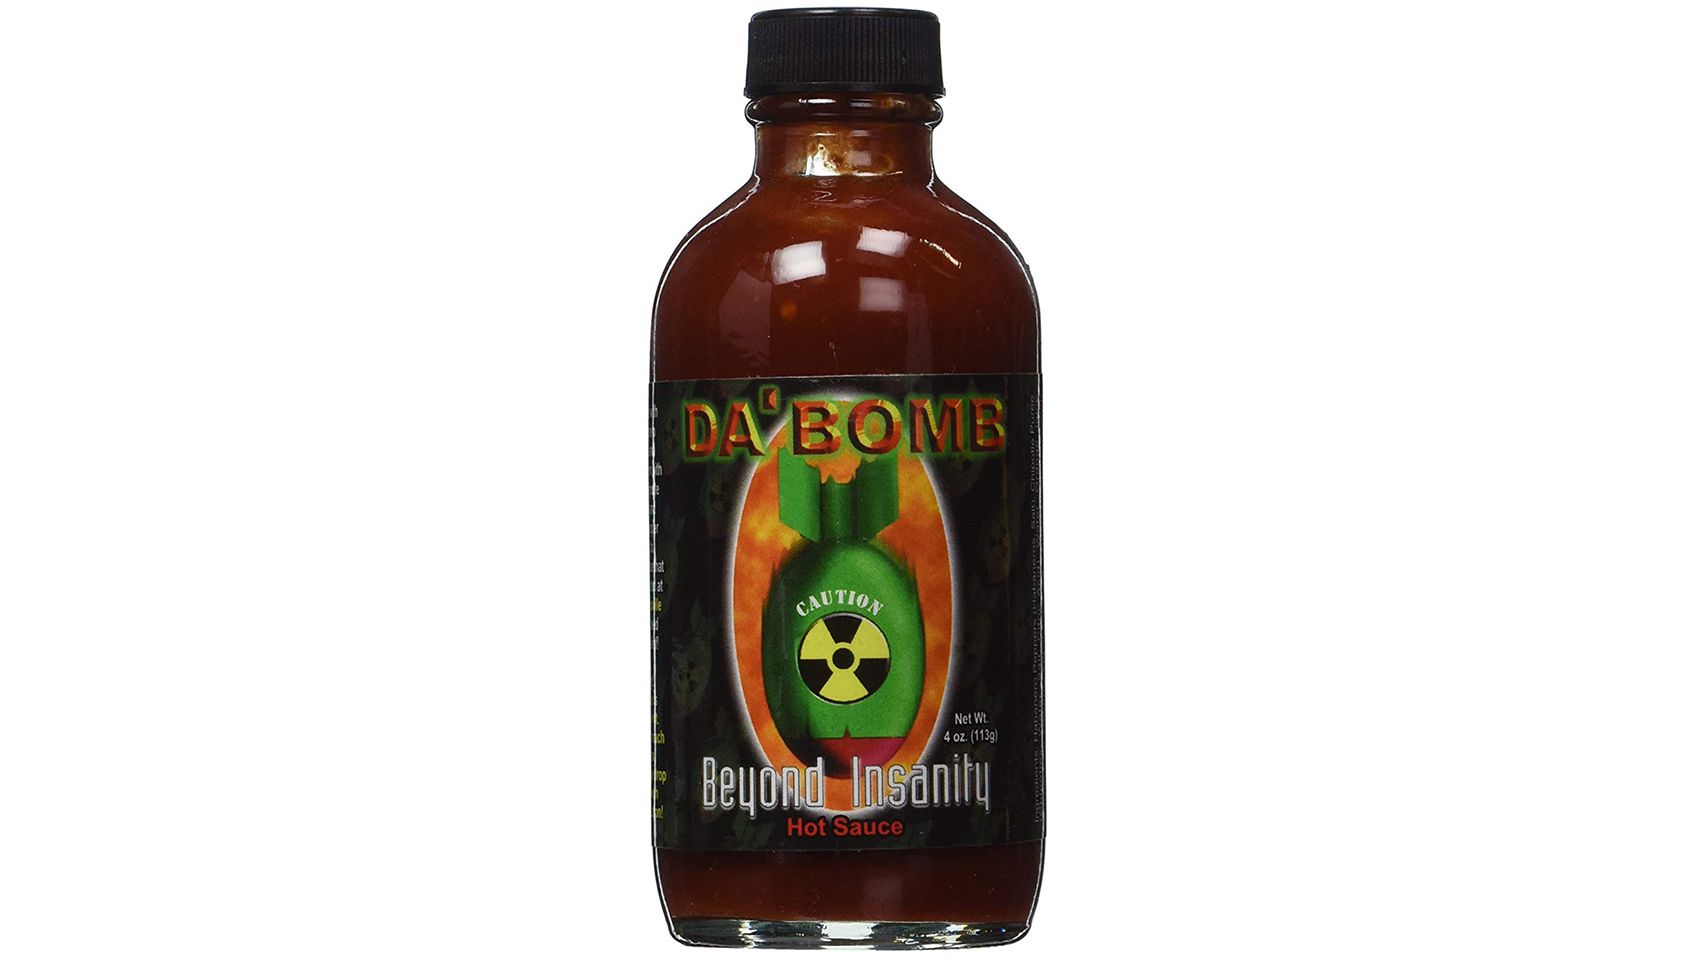 Ranked: All the Hot Ones Hot Sauces (Based on Scoville Heat Units)